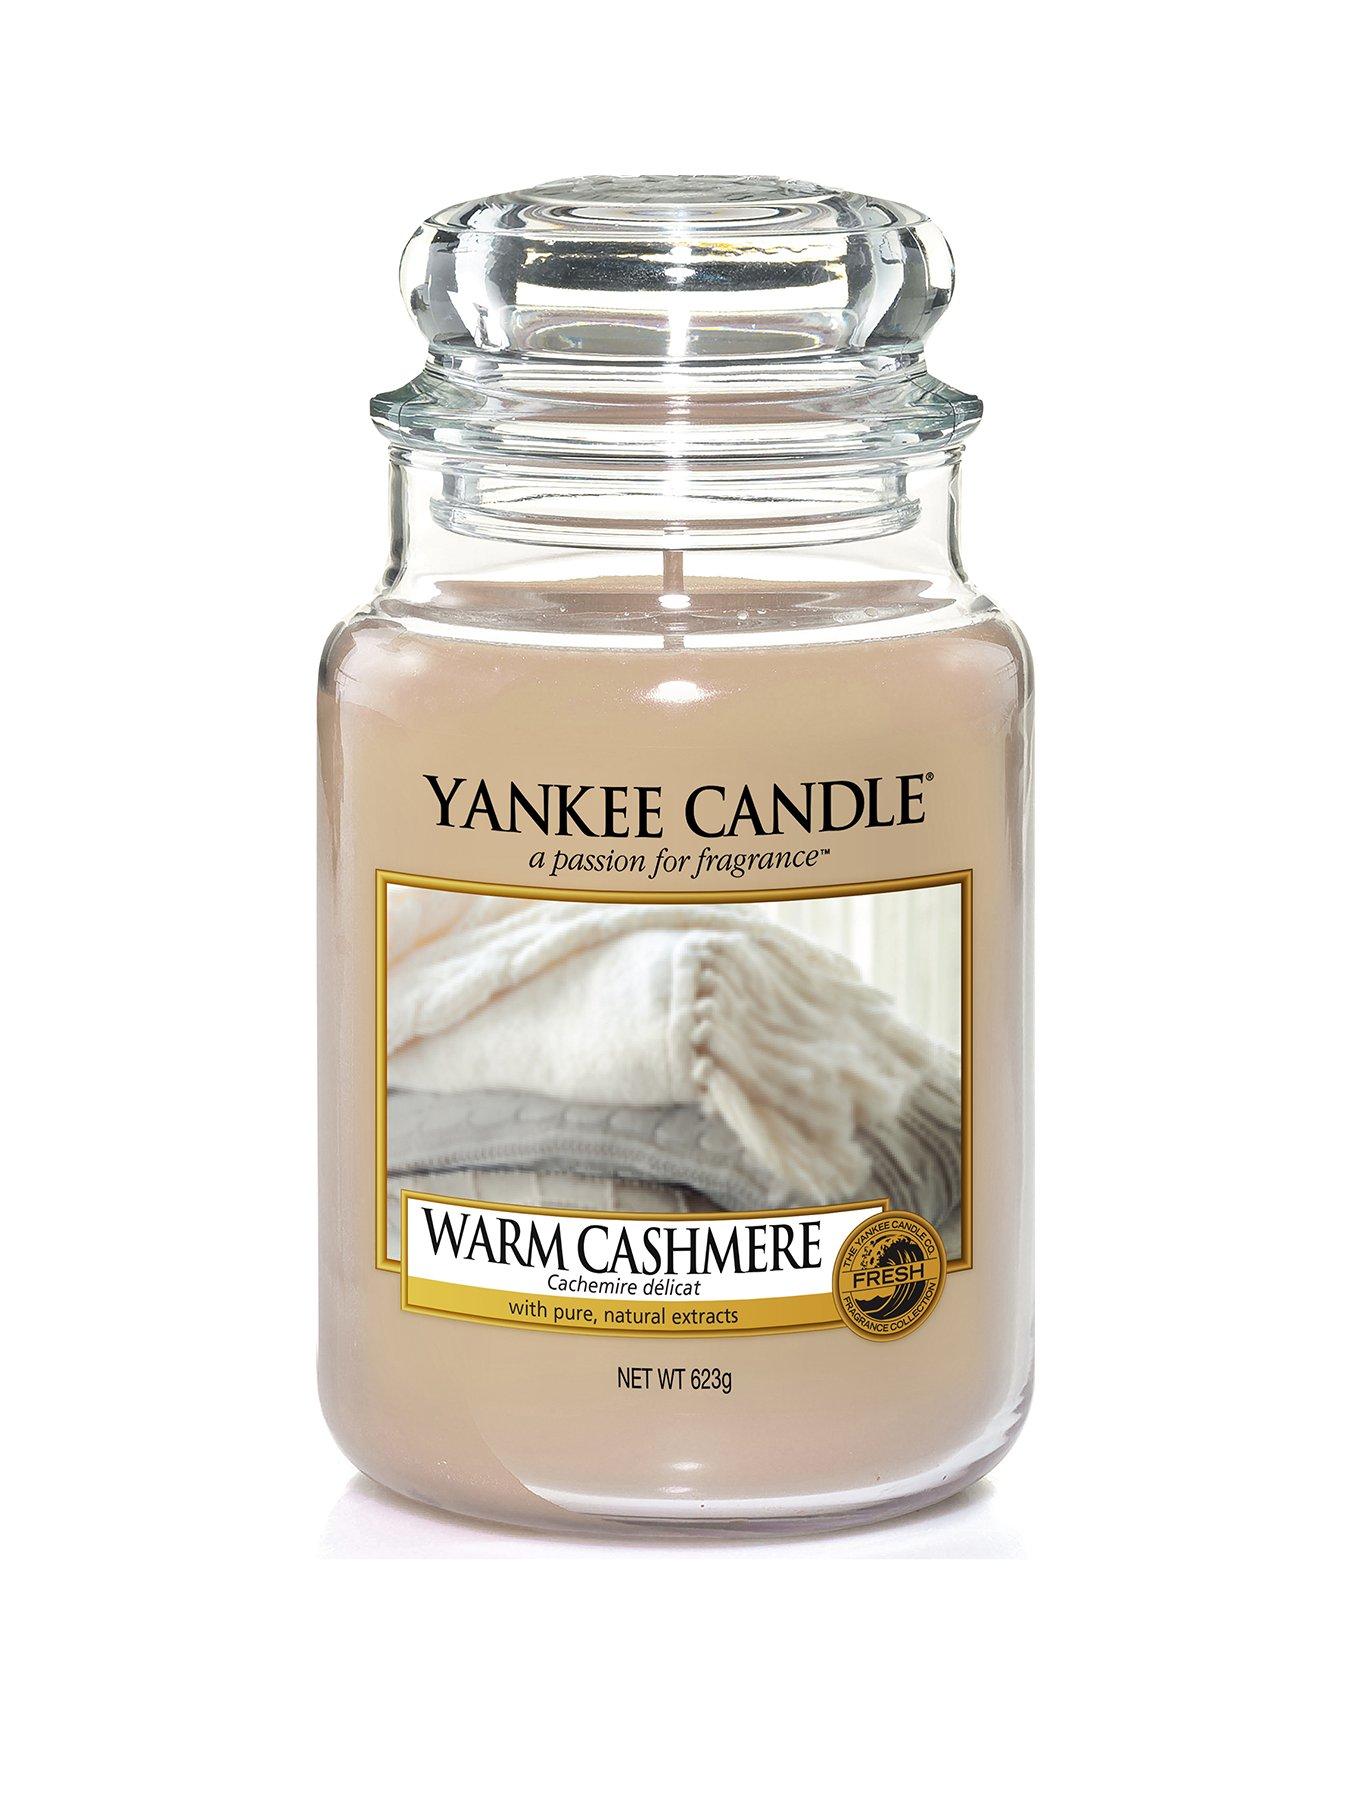 Yankee Candle Simply Home Reed Diffuser Fragrance Oil - White Linen & Lace